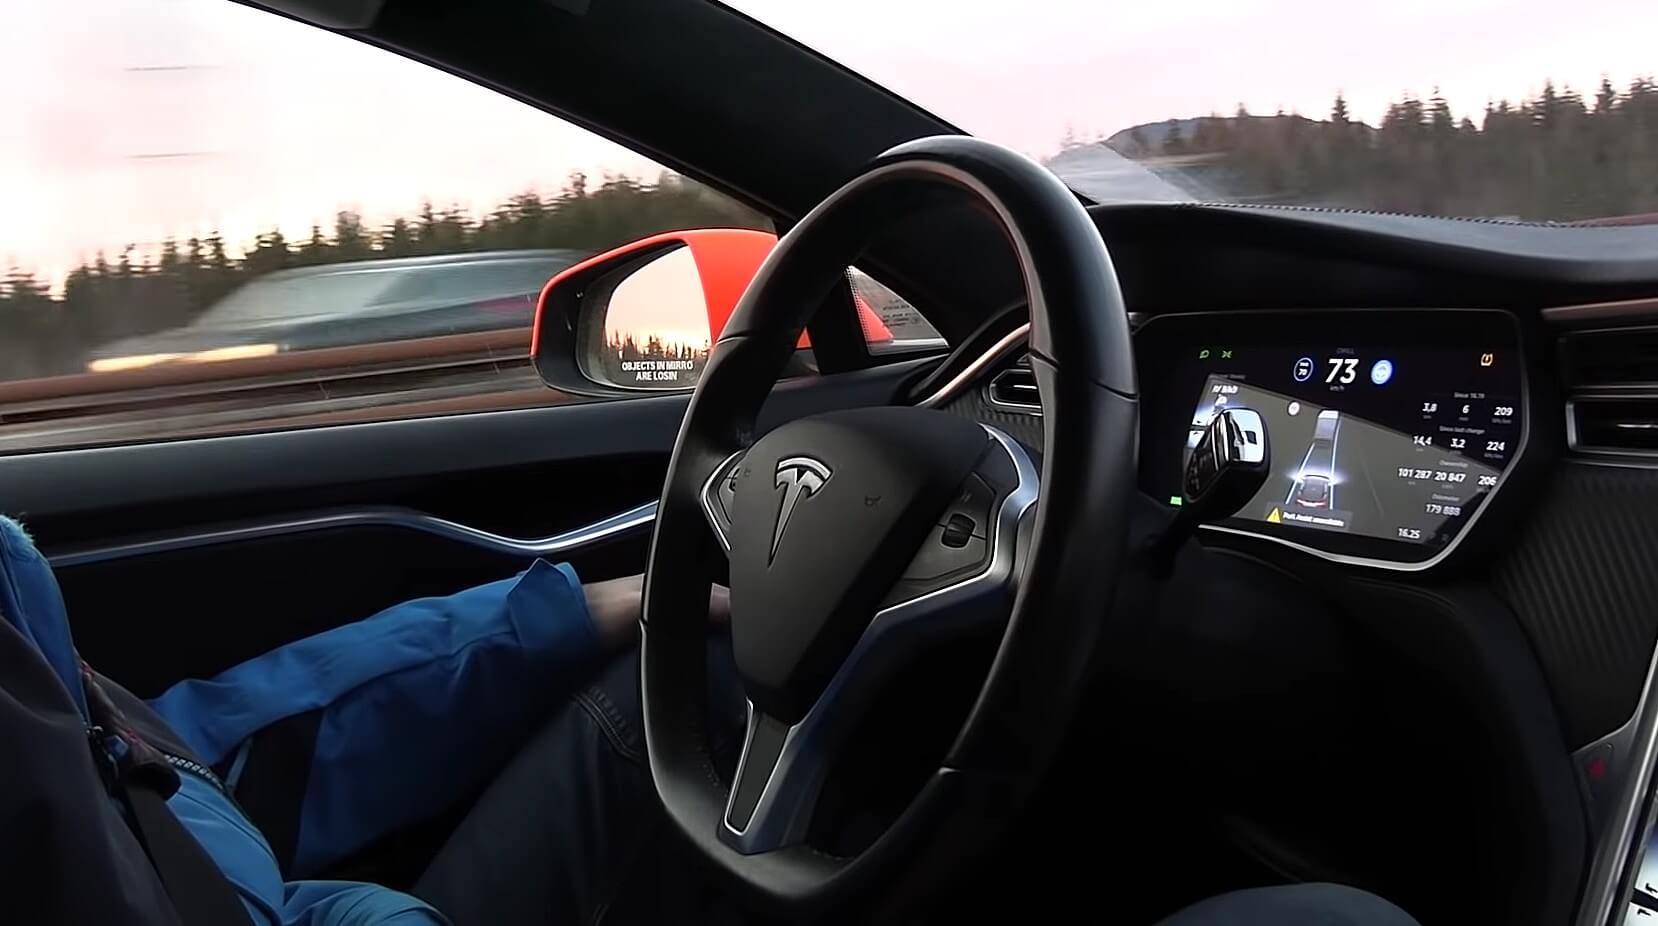 Tesla remotely disabled the autopilot on the Model S after the resale of the car